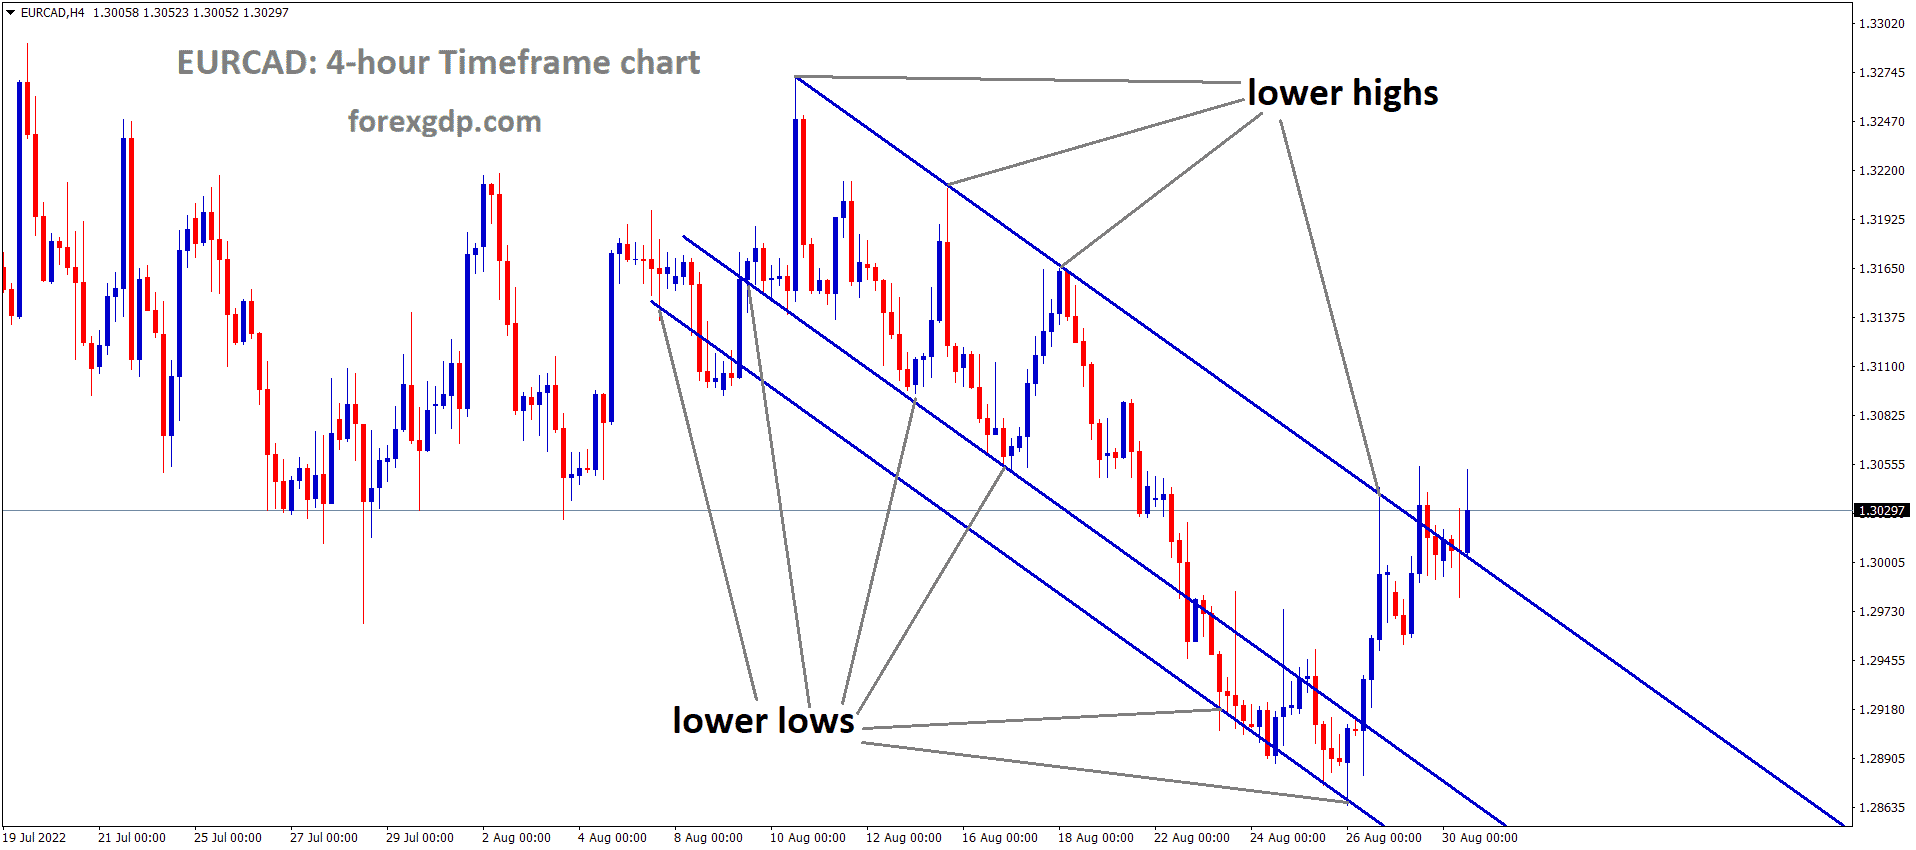 EURCAD is moving in the Descending channel and the market has reached the lower high area of the channel 1